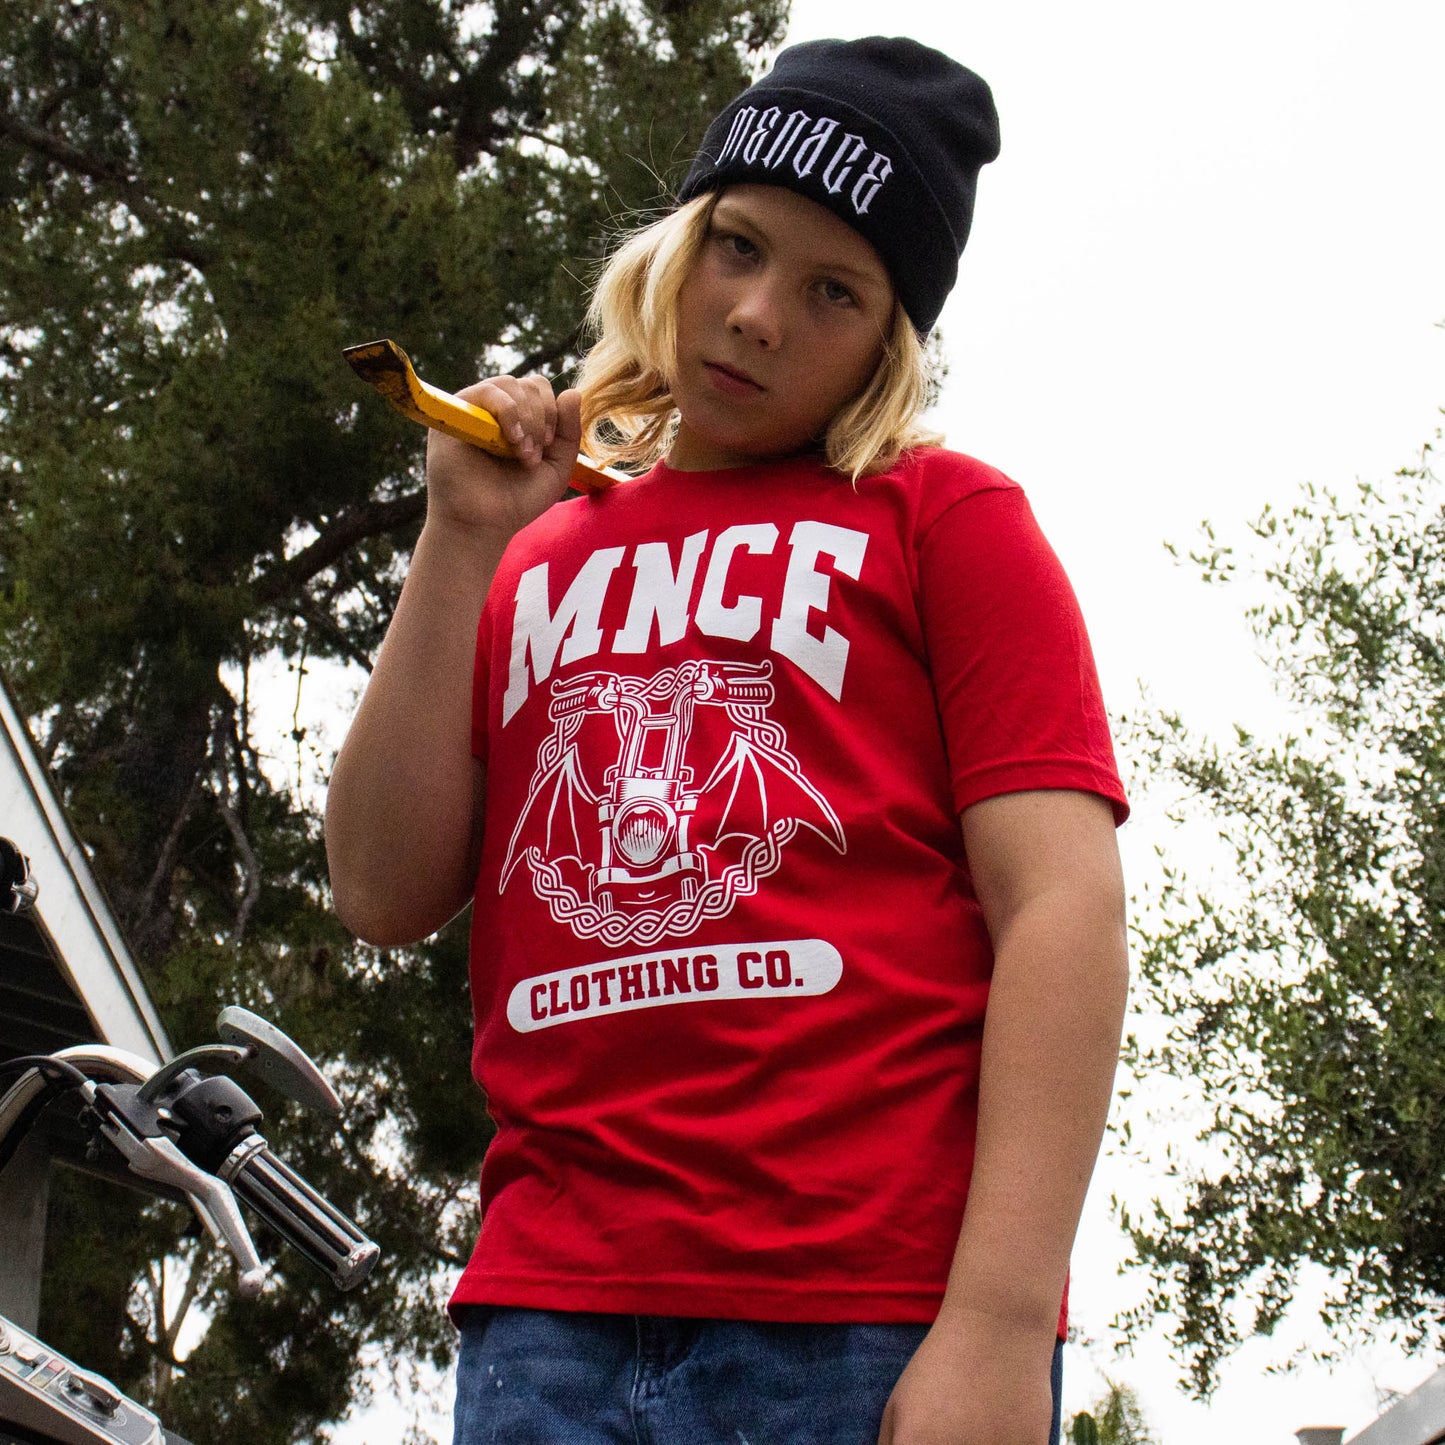 MNCE - Youth T-Shirt